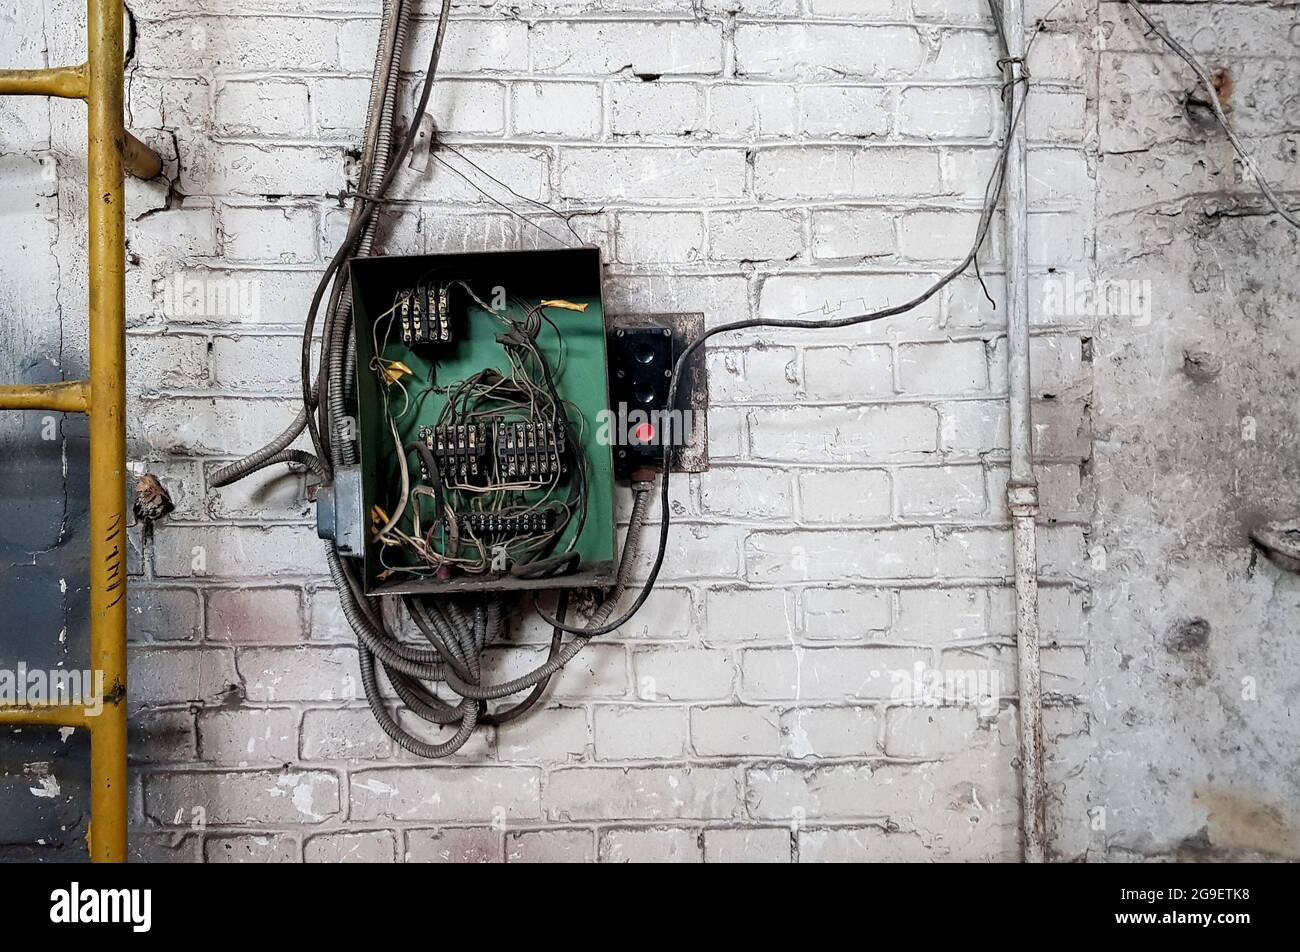 Old electrical panel on the wall of the house. Electric cables stick out from the electric panel on the white brick wall of the old house Stock Photo